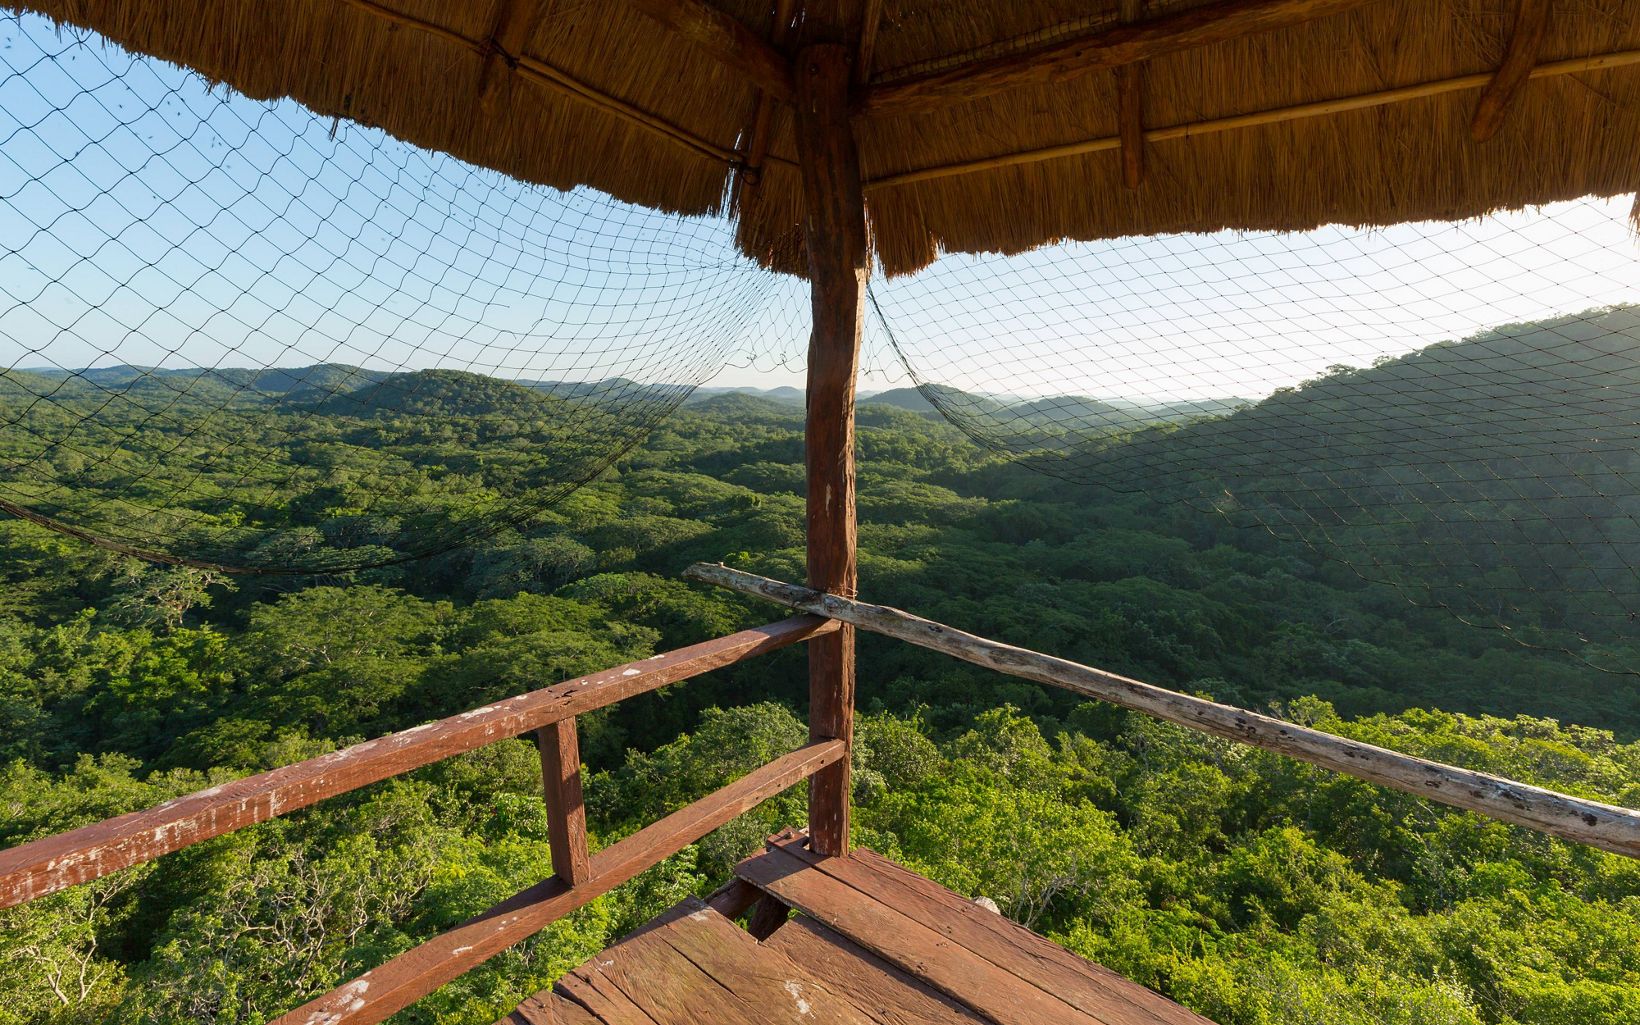 
                
                  Yucatan in Mexico.  View from the observation tower at the 4,500 acre Kaxil Kiuic Biocultural Reserve operated by Millsaps College in San Sebastian, Yucatan in Mexico. 
                  © Erich Schlegel
                
              